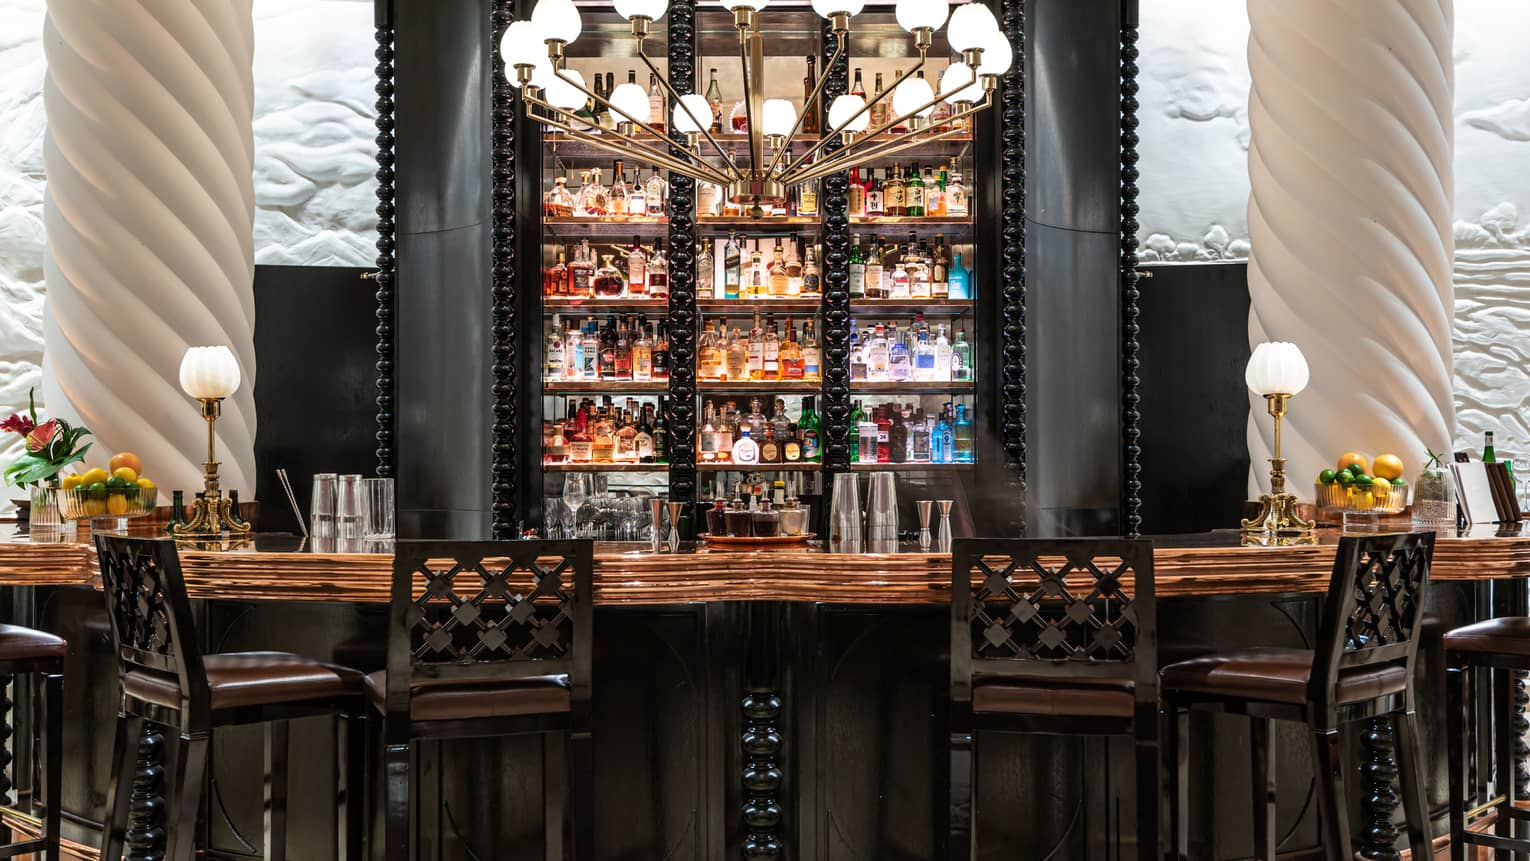 Wall of liquor bottles behind the wooden bar, four black barstools in front, white columns on either side